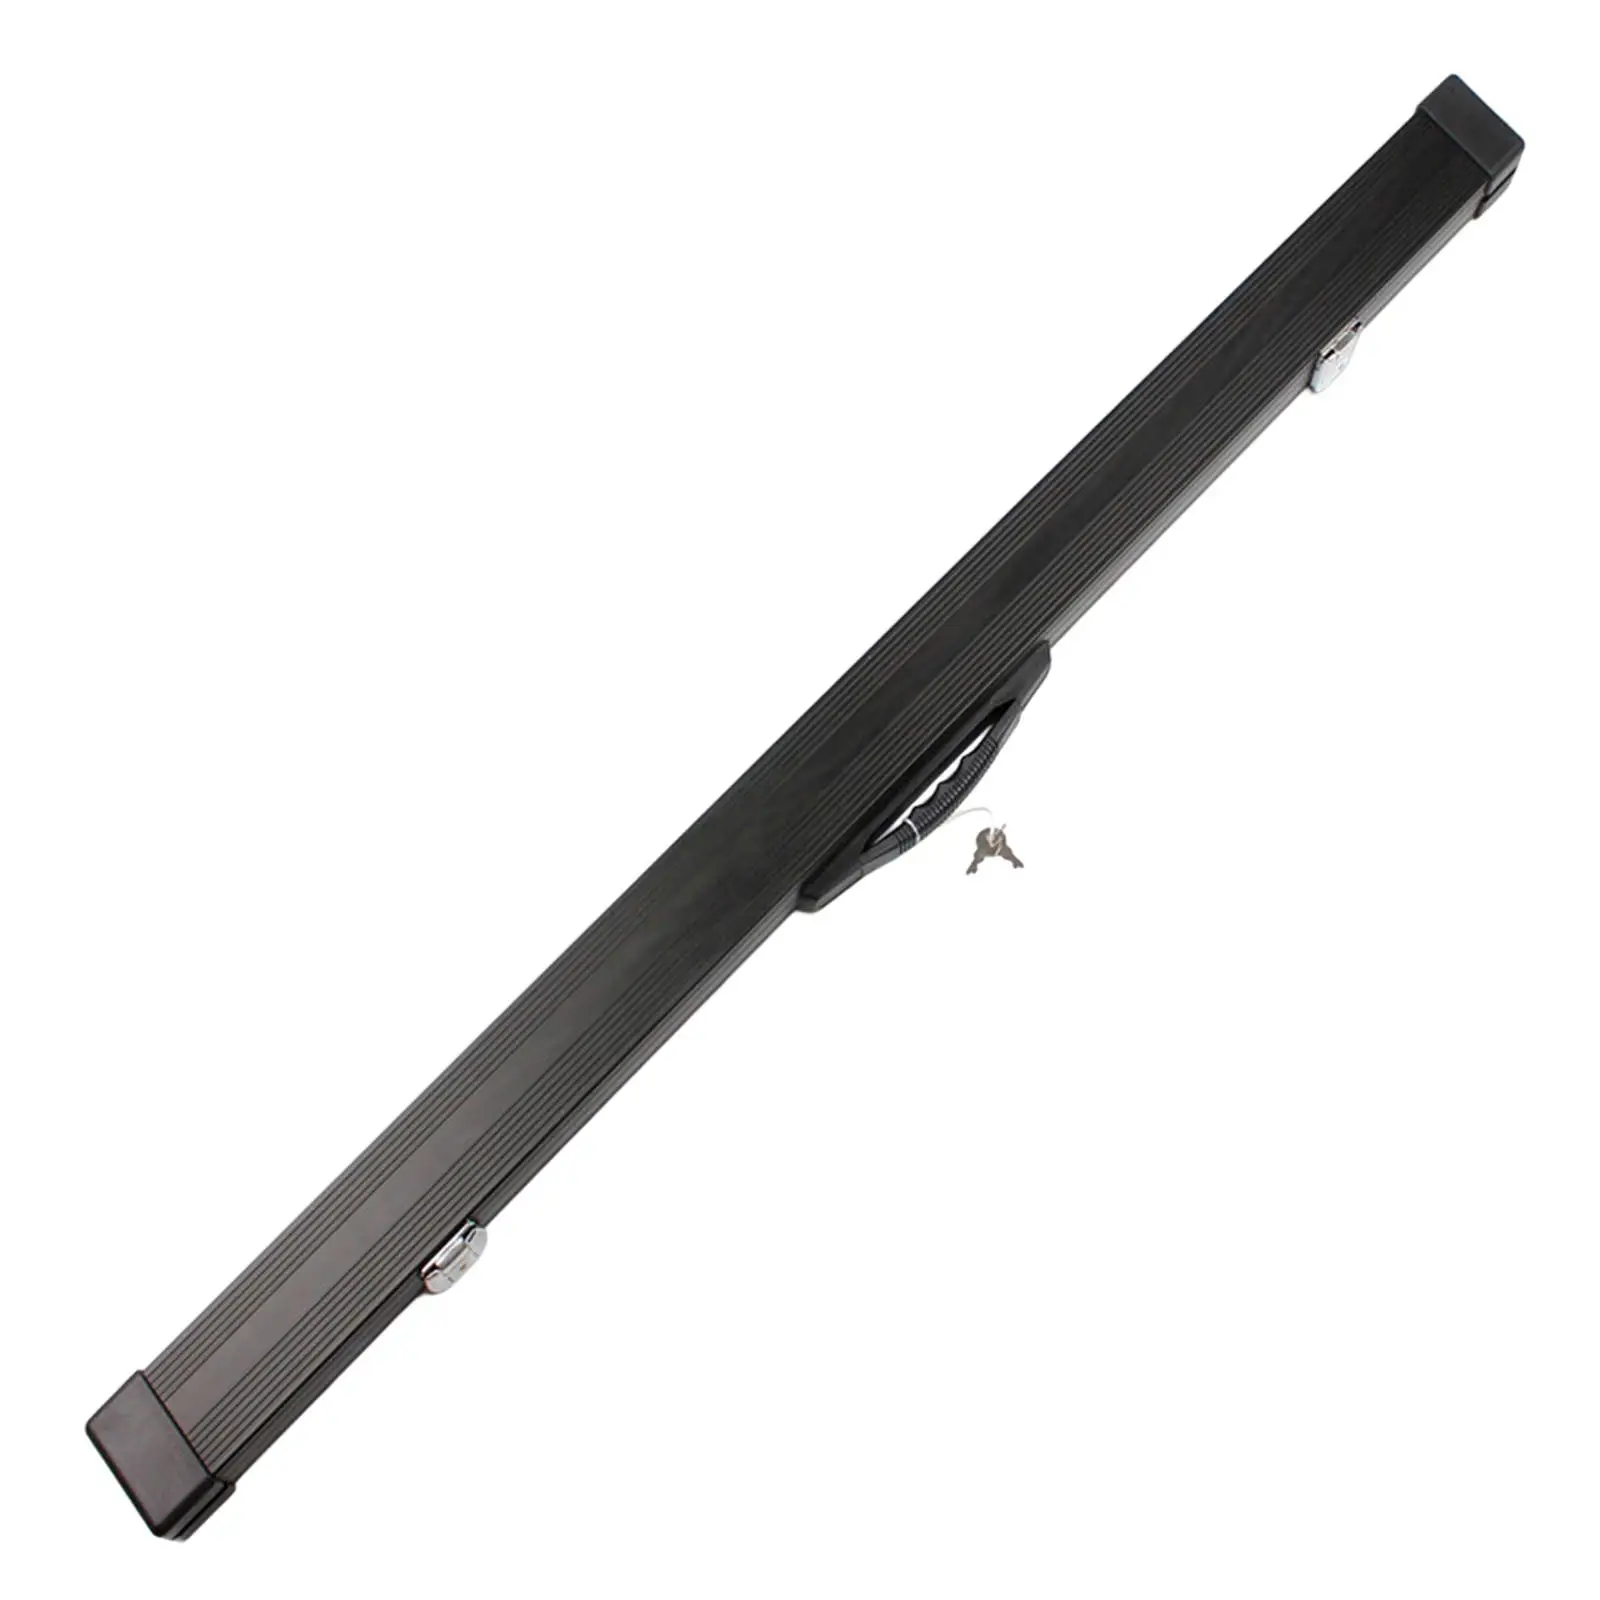 Professional Billiards Pool Cue Case with Internal Divider 3/4 Jointed Heavy Duty Carrying Box Snooker Club Accessories